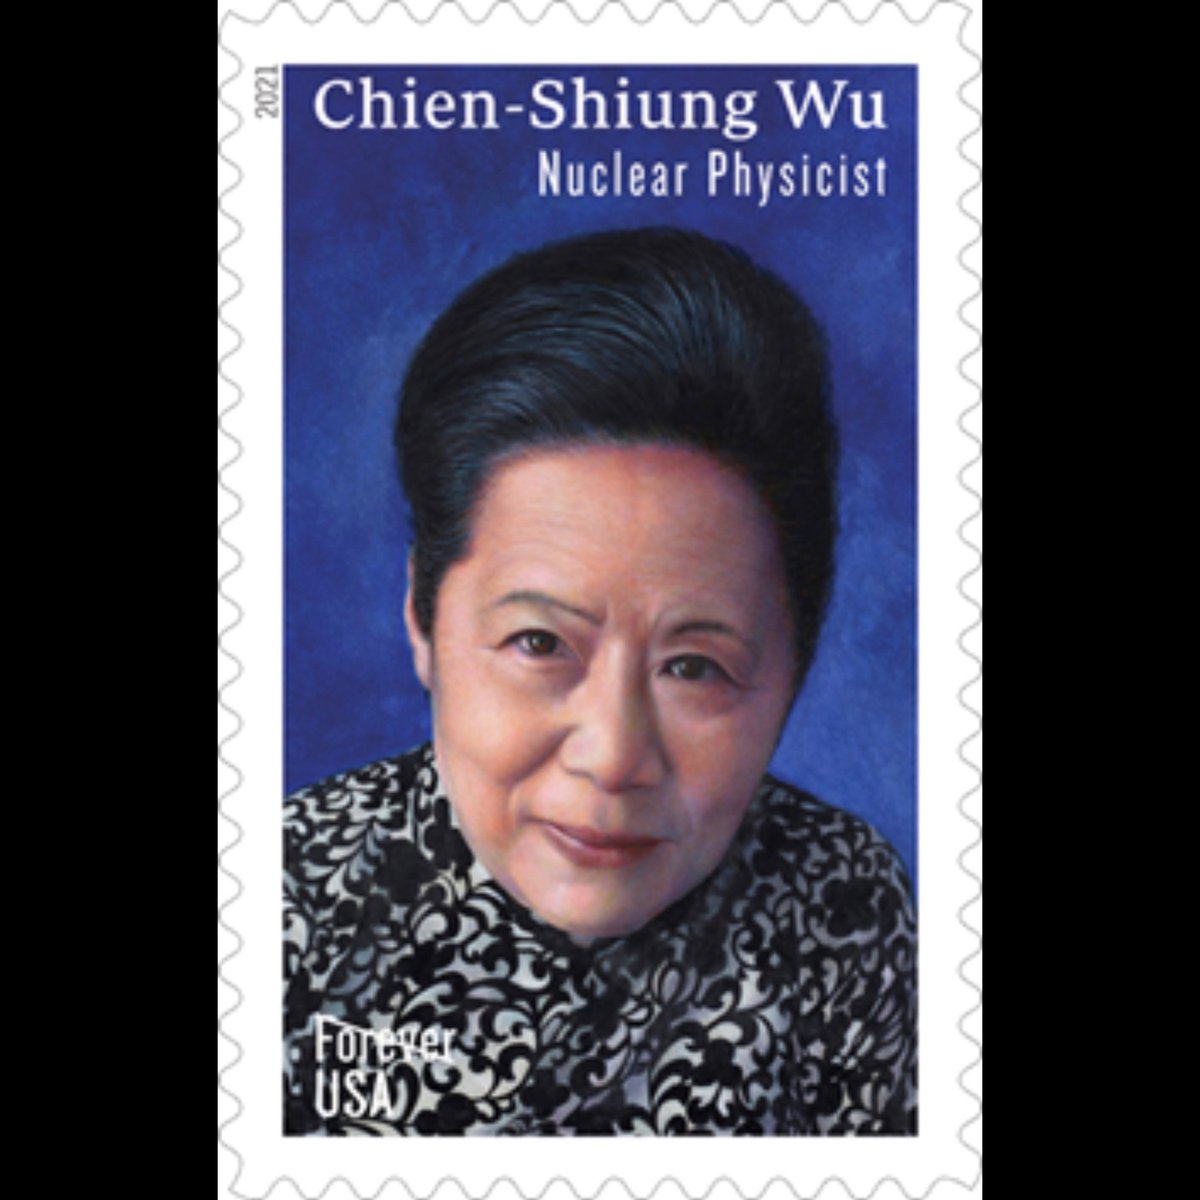 Some truly exciting news: my grandmother, Dr. Chien-Shiung Wu, is going to be on a Forever stamp from the U.S. Postal Service. She was a nuclear physicist who helped disprove a fundamental law of nature and changed a field dominated by men. We’re so grateful for the honor.